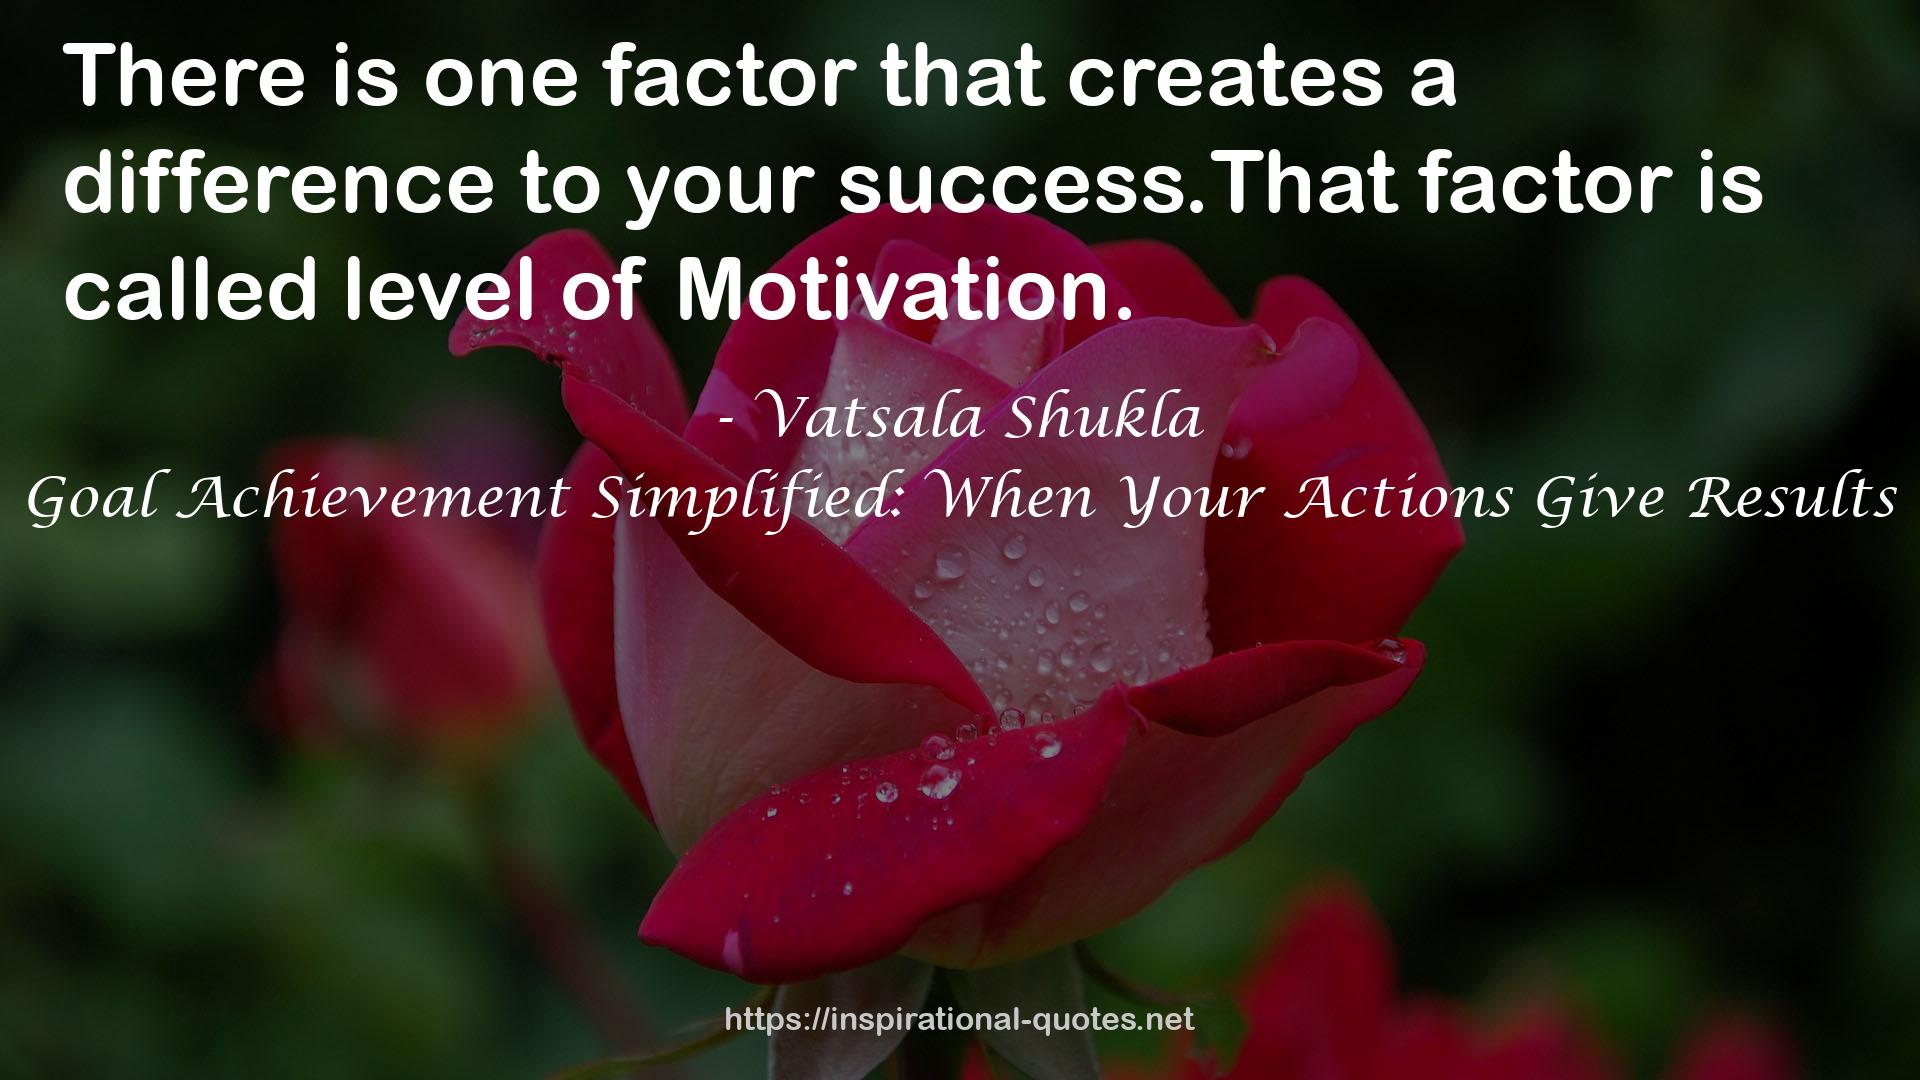 Goal Achievement Simplified: When Your Actions Give Results QUOTES